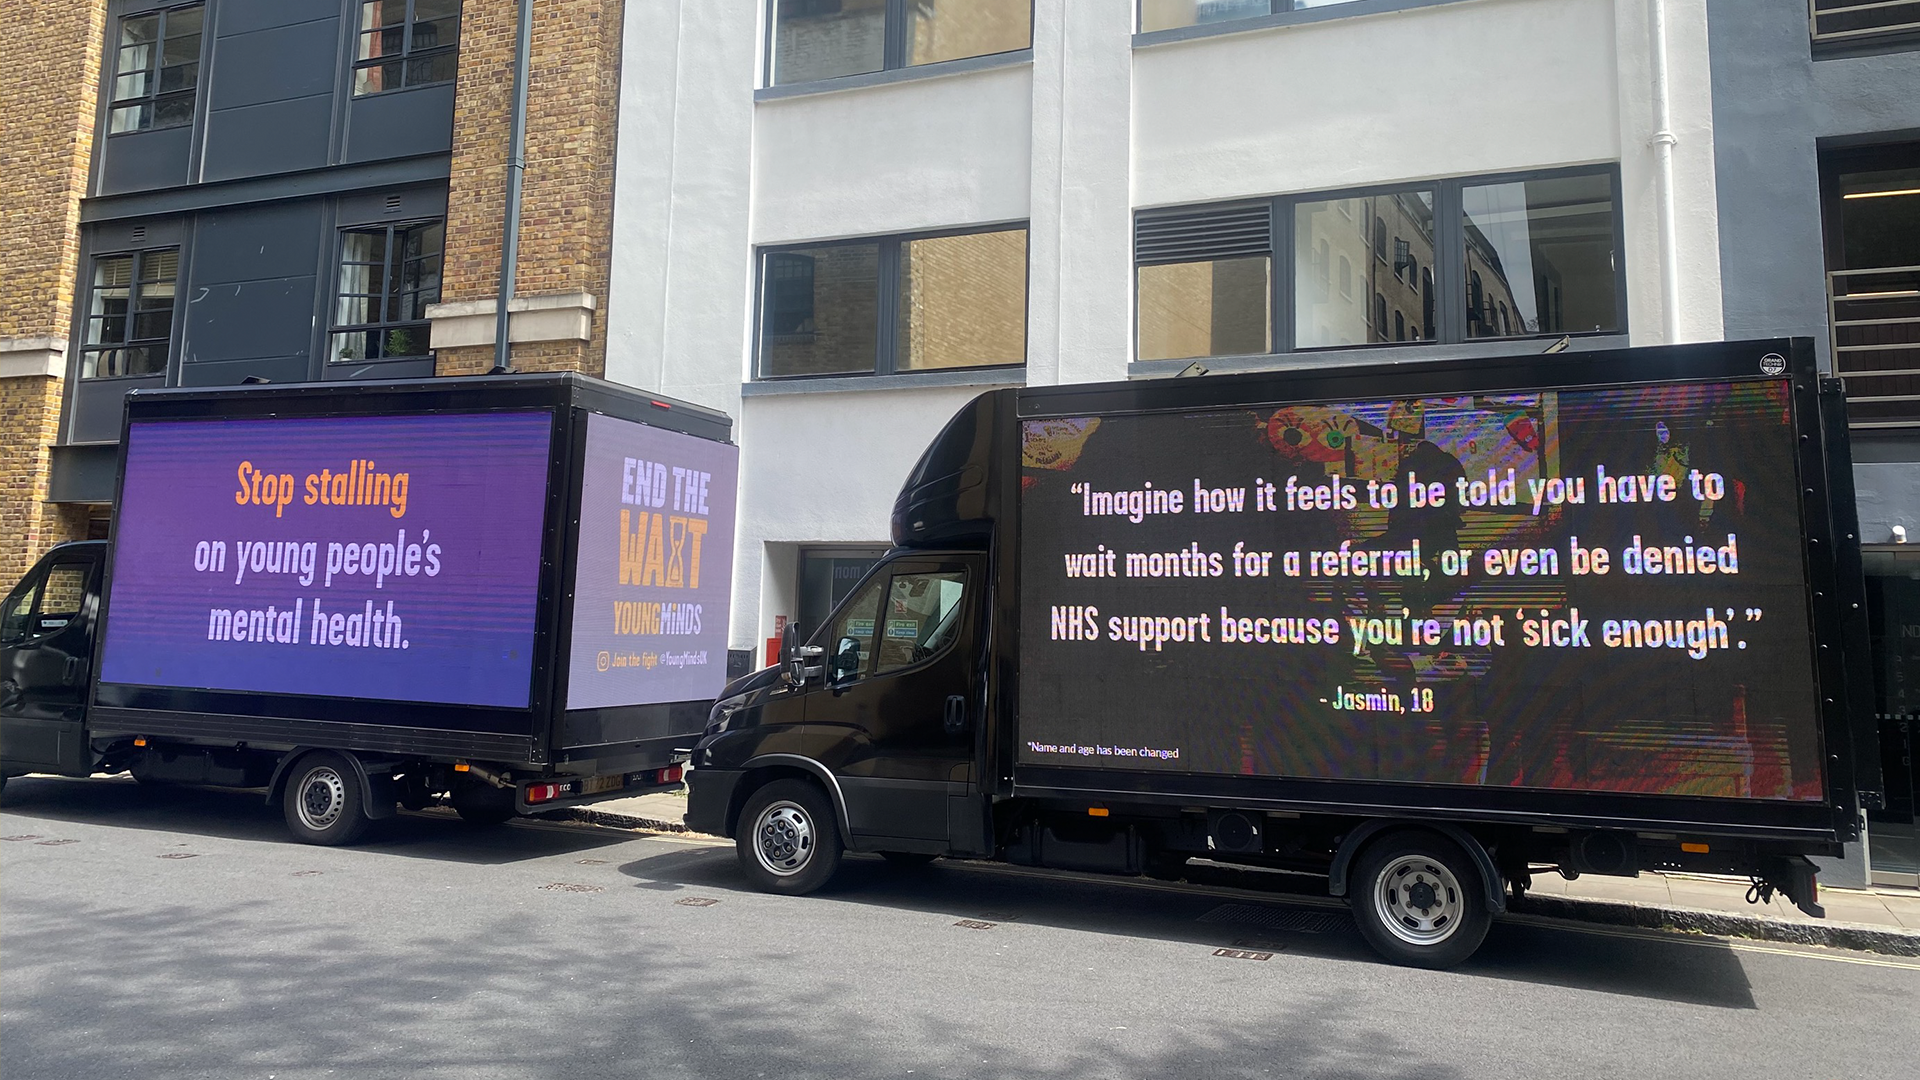 Two vans driving around Parliament. The first reads: "Stop stalling on young people's mental health." The second reads "Imagine how it feels to be told you have to wait months for a referral, or even be denied NHS support because you're not 'sick enough' - Jasmin, 18"